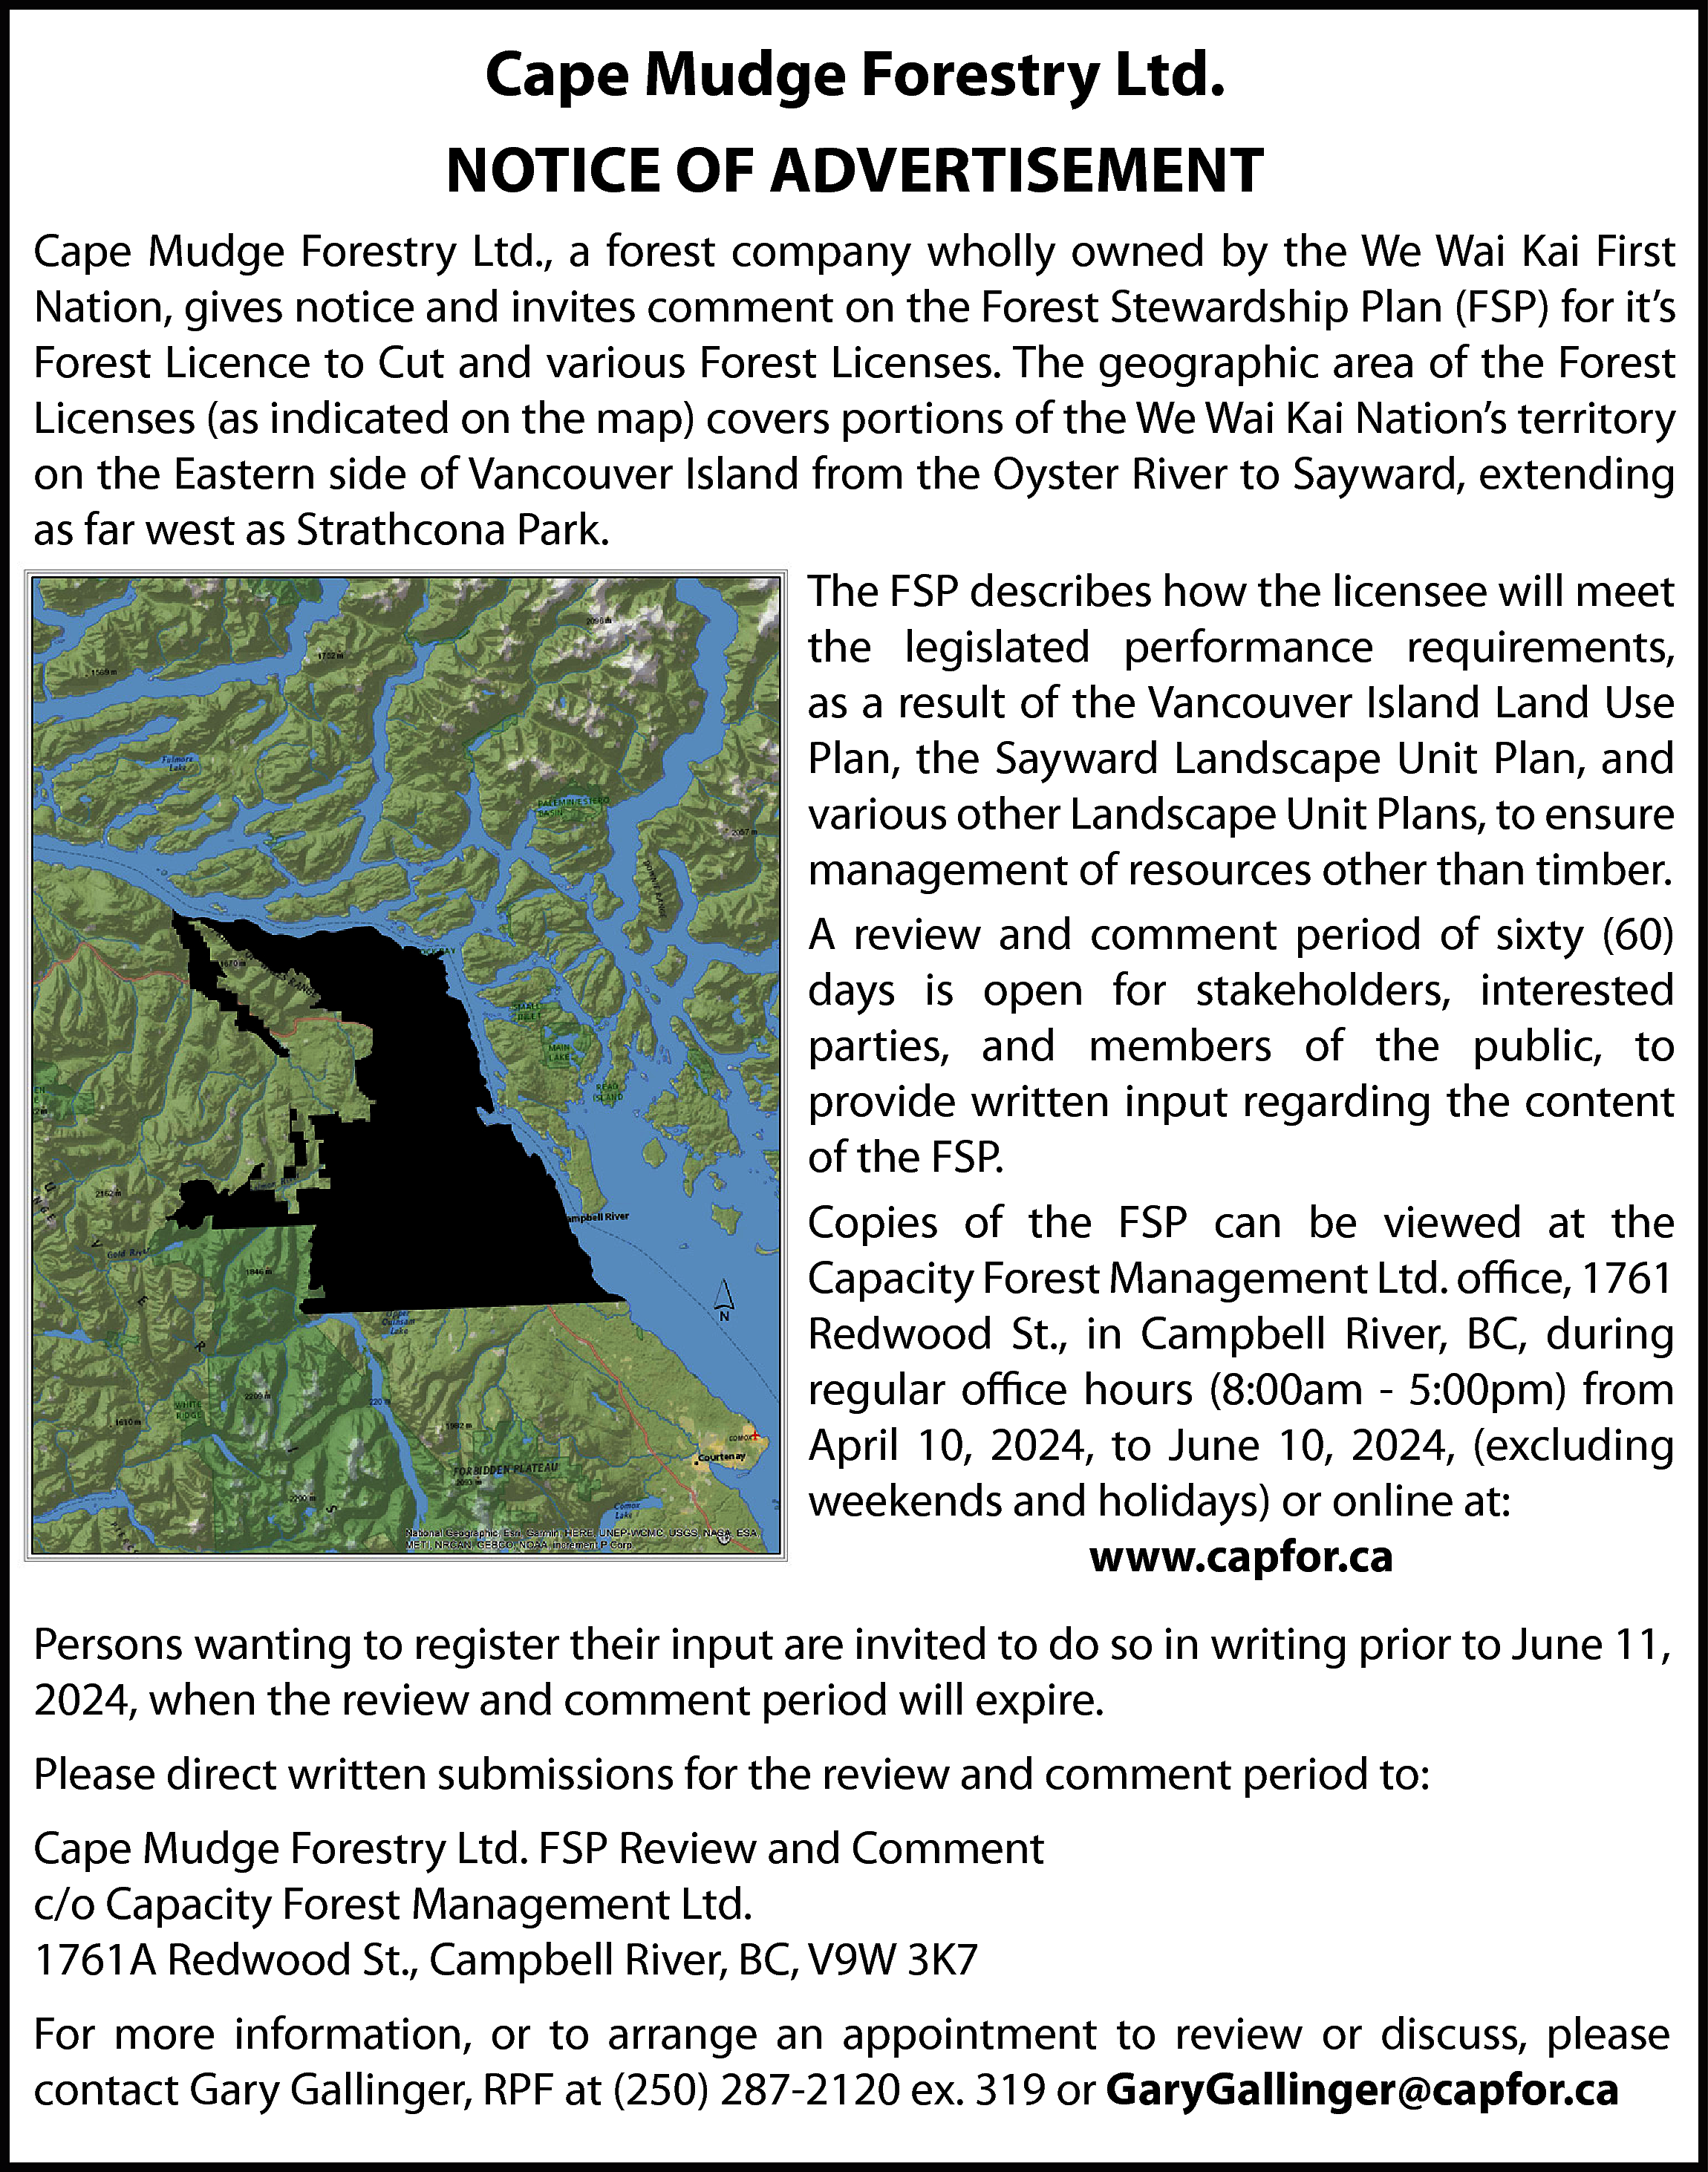 Cape Mudge Forestry Ltd. <br>NOTICE  Cape Mudge Forestry Ltd.  NOTICE OF ADVERTISEMENT  Cape Mudge Forestry Ltd., a forest company wholly owned by the We Wai Kai First  Nation, gives notice and invites comment on the Forest Stewardship Plan (FSP) for it’s  Forest Licence to Cut and various Forest Licenses. The geographic area of the Forest  Licenses (as indicated on the map) covers portions of the We Wai Kai Nation’s territory  on the Eastern side of Vancouver Island from the Oyster River to Sayward, extending  as far west as Strathcona Park.  The FSP describes how the licensee will meet  the legislated performance requirements,  as a result of the Vancouver Island Land Use  Plan, the Sayward Landscape Unit Plan, and  various other Landscape Unit Plans, to ensure  management of resources other than timber.  A review and comment period of sixty (60)  days is open for stakeholders, interested  parties, and members of the public, to  provide written input regarding the content  of the FSP.  Copies of the FSP can be viewed at the  Capacity Forest Management Ltd. office, 1761  Redwood St., in Campbell River, BC, during  regular office hours (8:00am - 5:00pm) from  April 10, 2024, to June 10, 2024, (excluding  weekends and holidays) or online at:  www.capfor.ca  Persons wanting to register their input are invited to do so in writing prior to June 11,  2024, when the review and comment period will expire.  Please direct written submissions for the review and comment period to:  Cape Mudge Forestry Ltd. FSP Review and Comment  c/o Capacity Forest Management Ltd.  1761A Redwood St., Campbell River, BC, V9W 3K7  For more information, or to arrange an appointment to review or discuss, please  contact Gary Gallinger, RPF at (250) 287-2120 ex. 319 or GaryGallinger@capfor.ca    